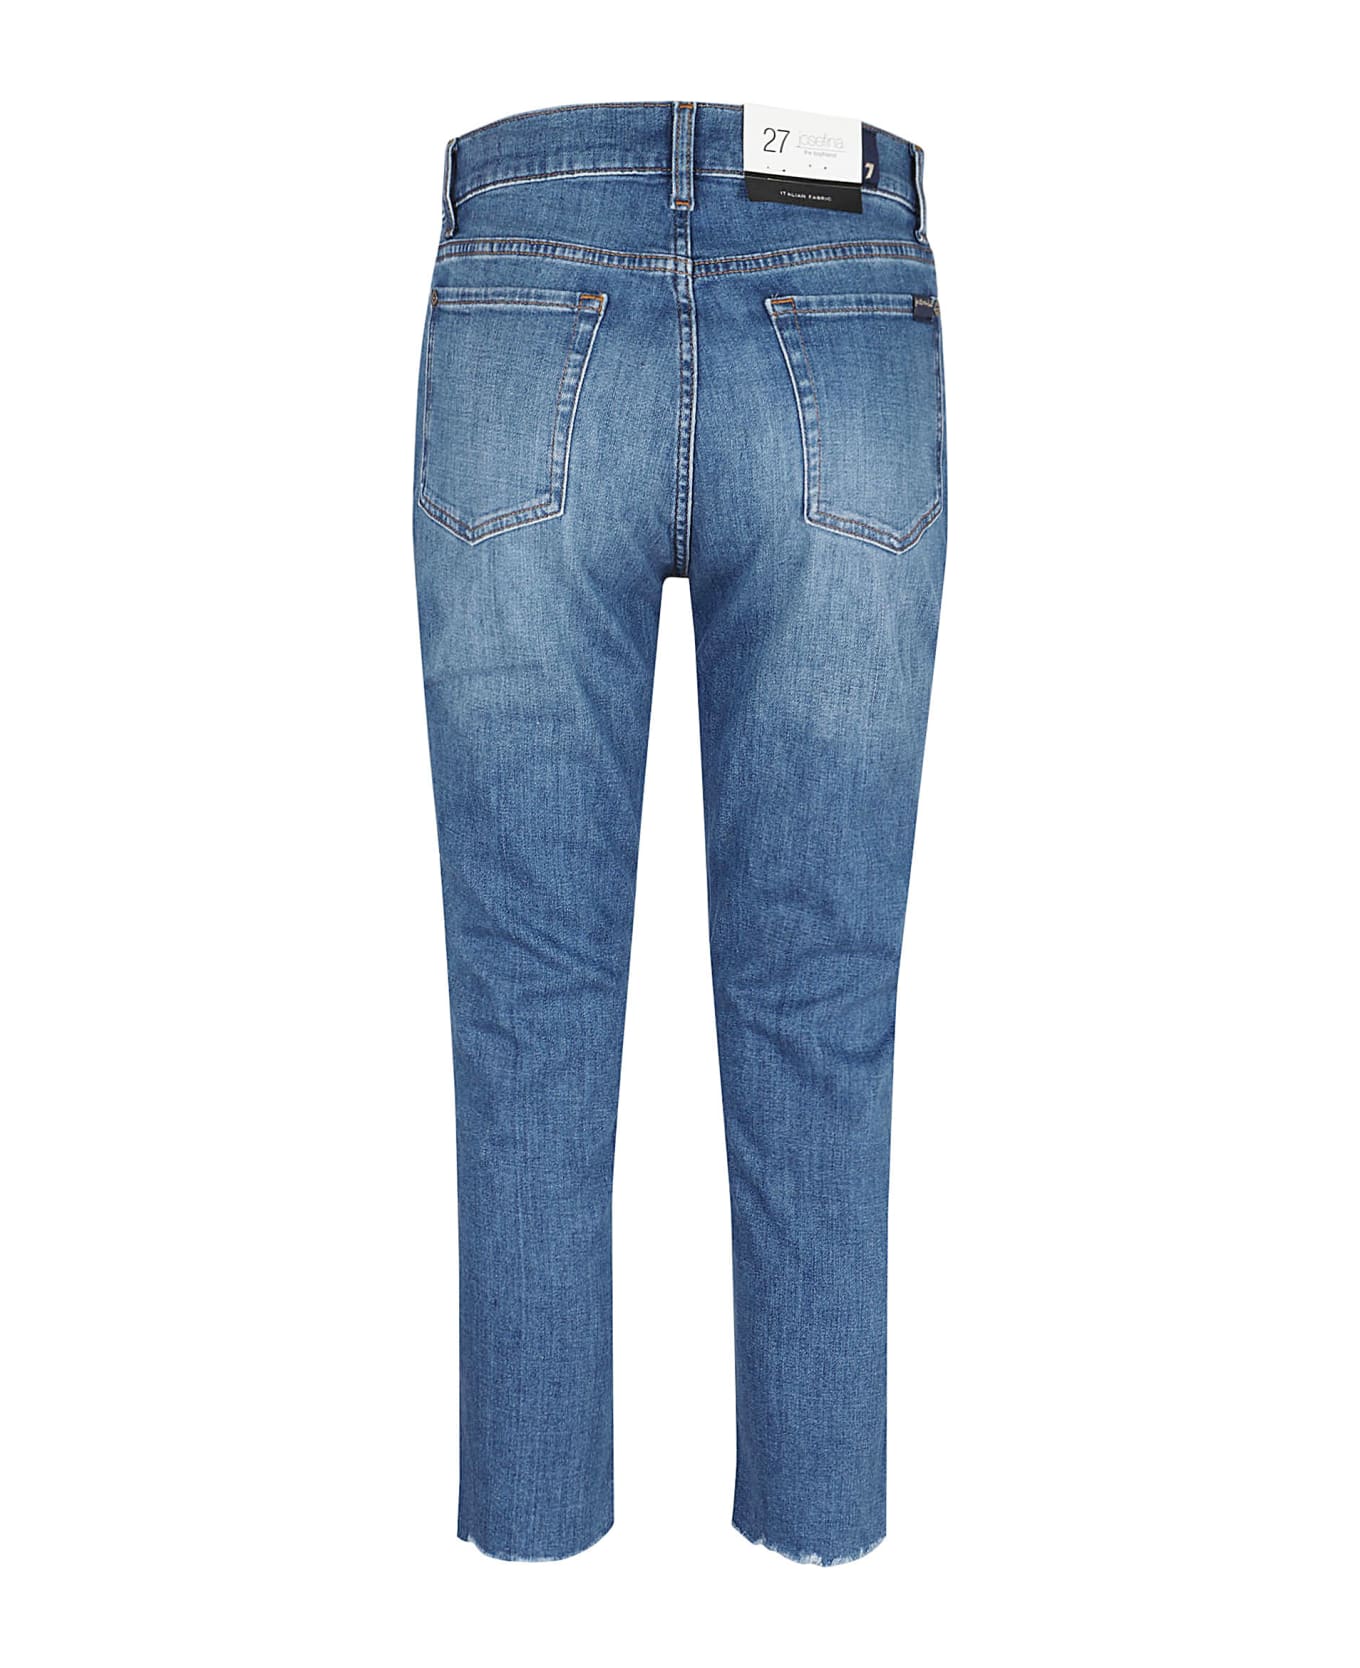 7 For All Mankind Josefina Blue River - Mid Blue デニム